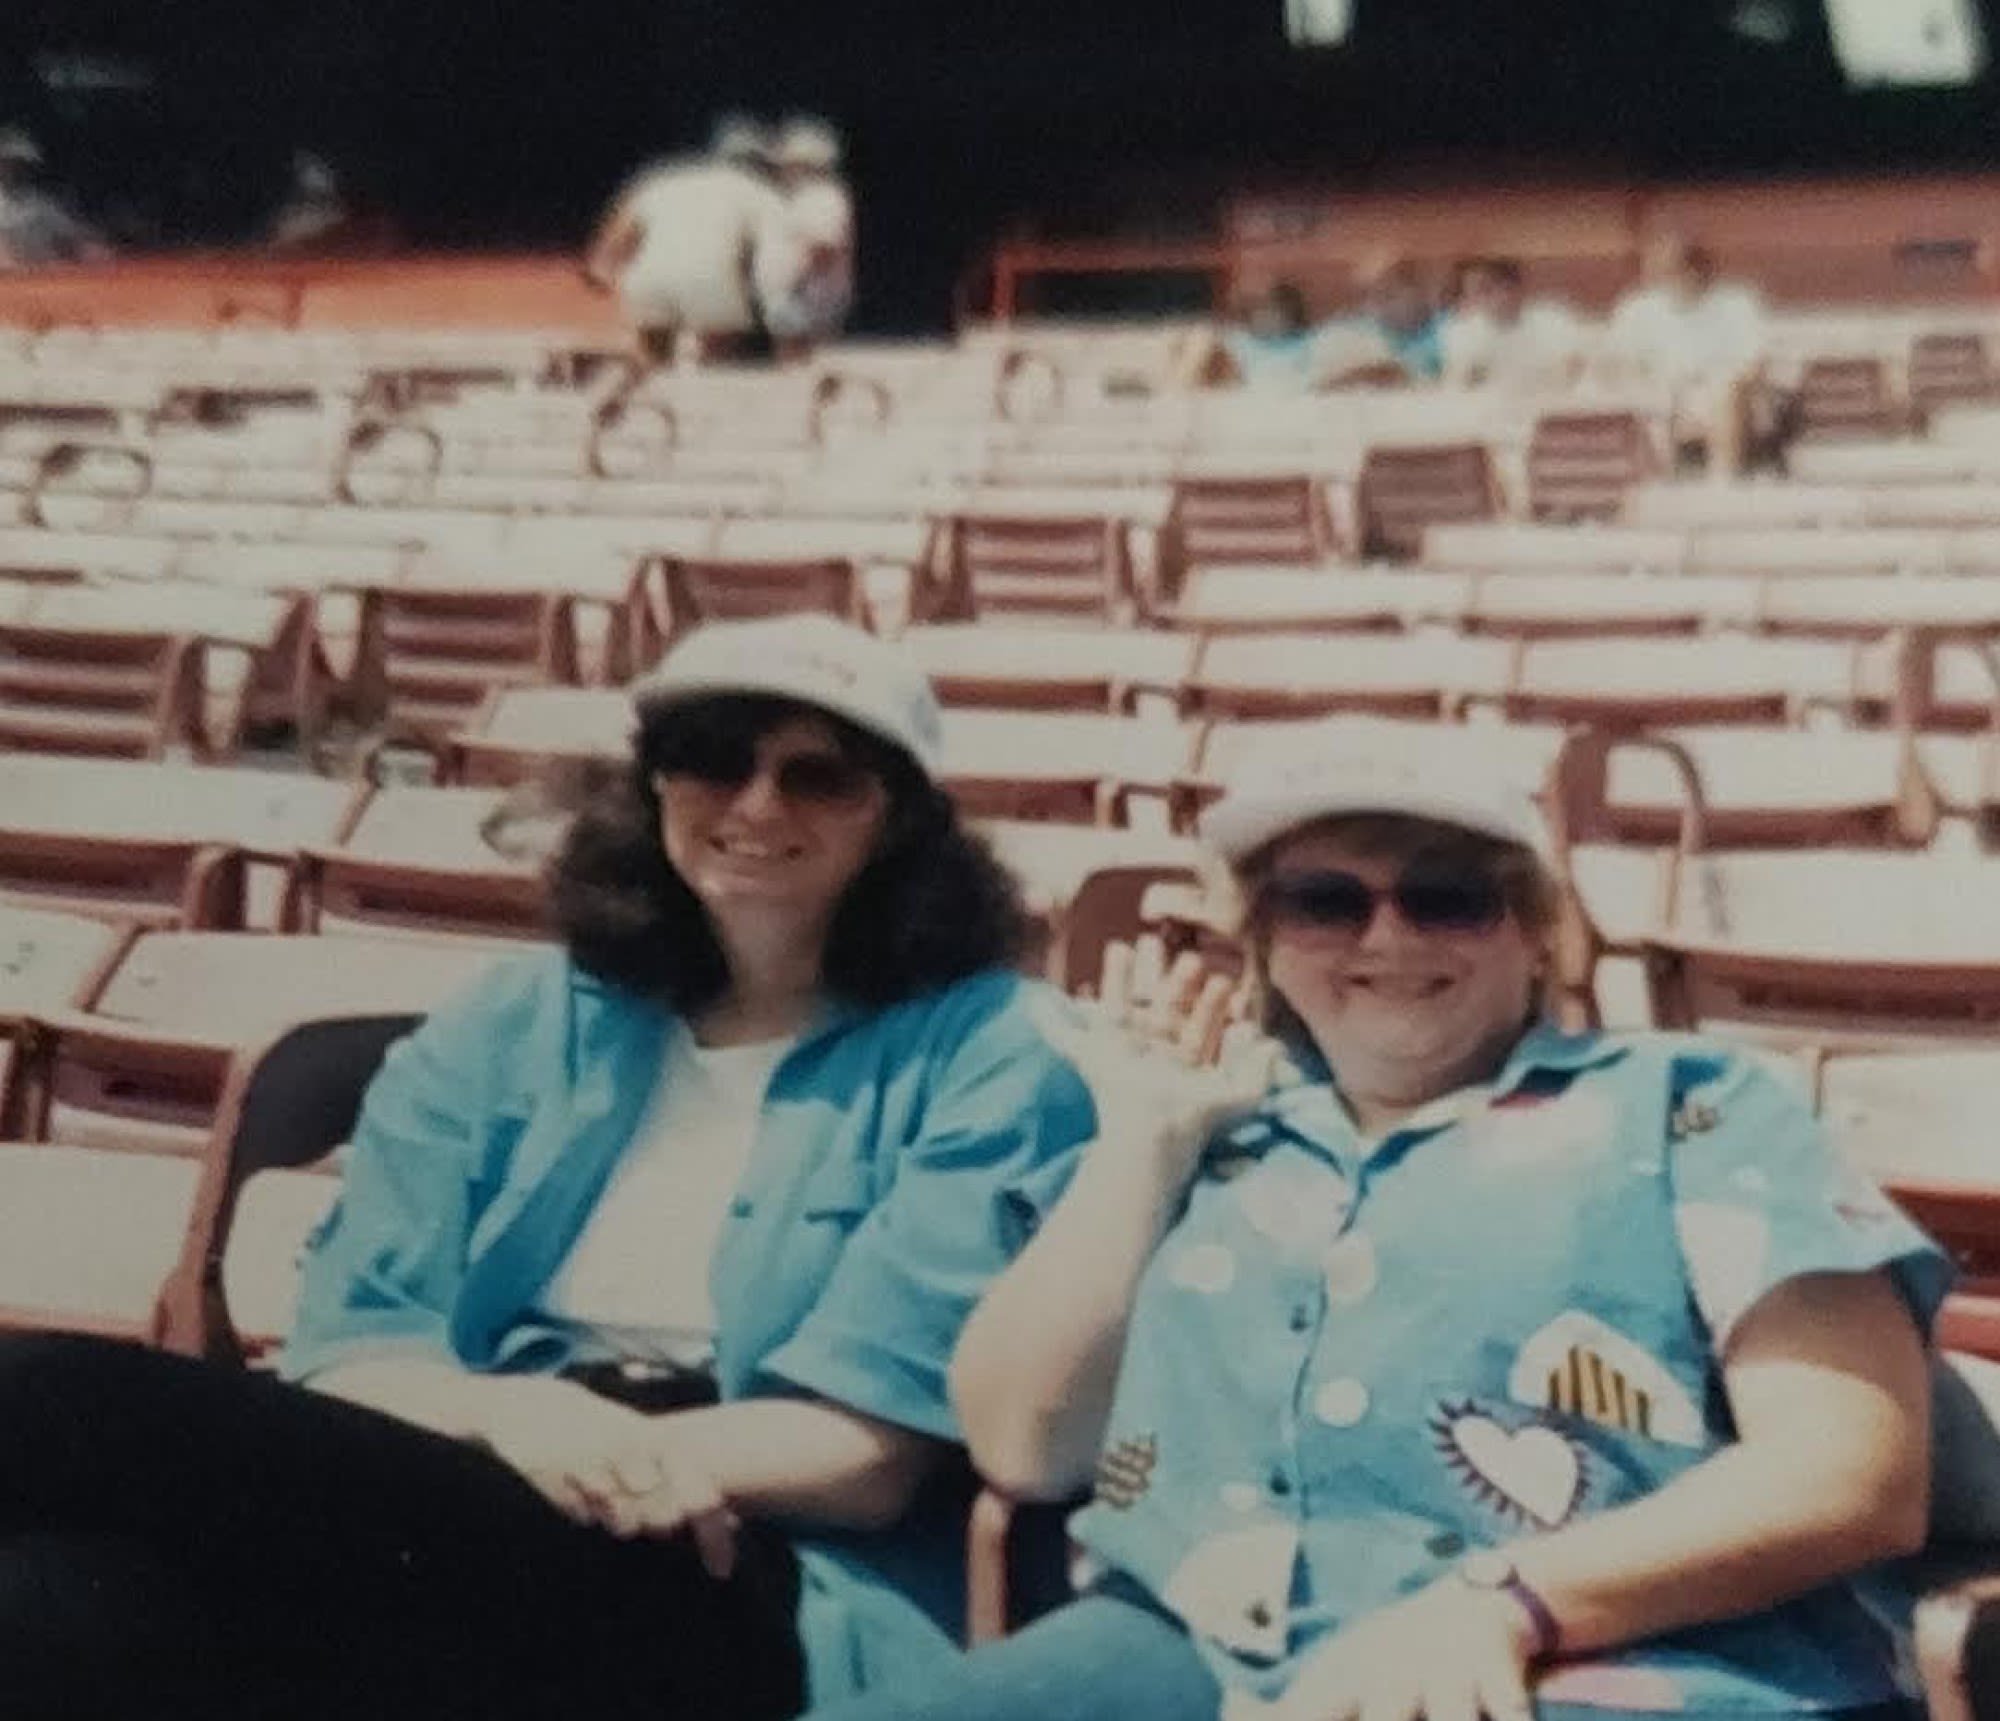 Debbie and Cathy loved going to Dodger Stadium to watch the LA Dodgers play.